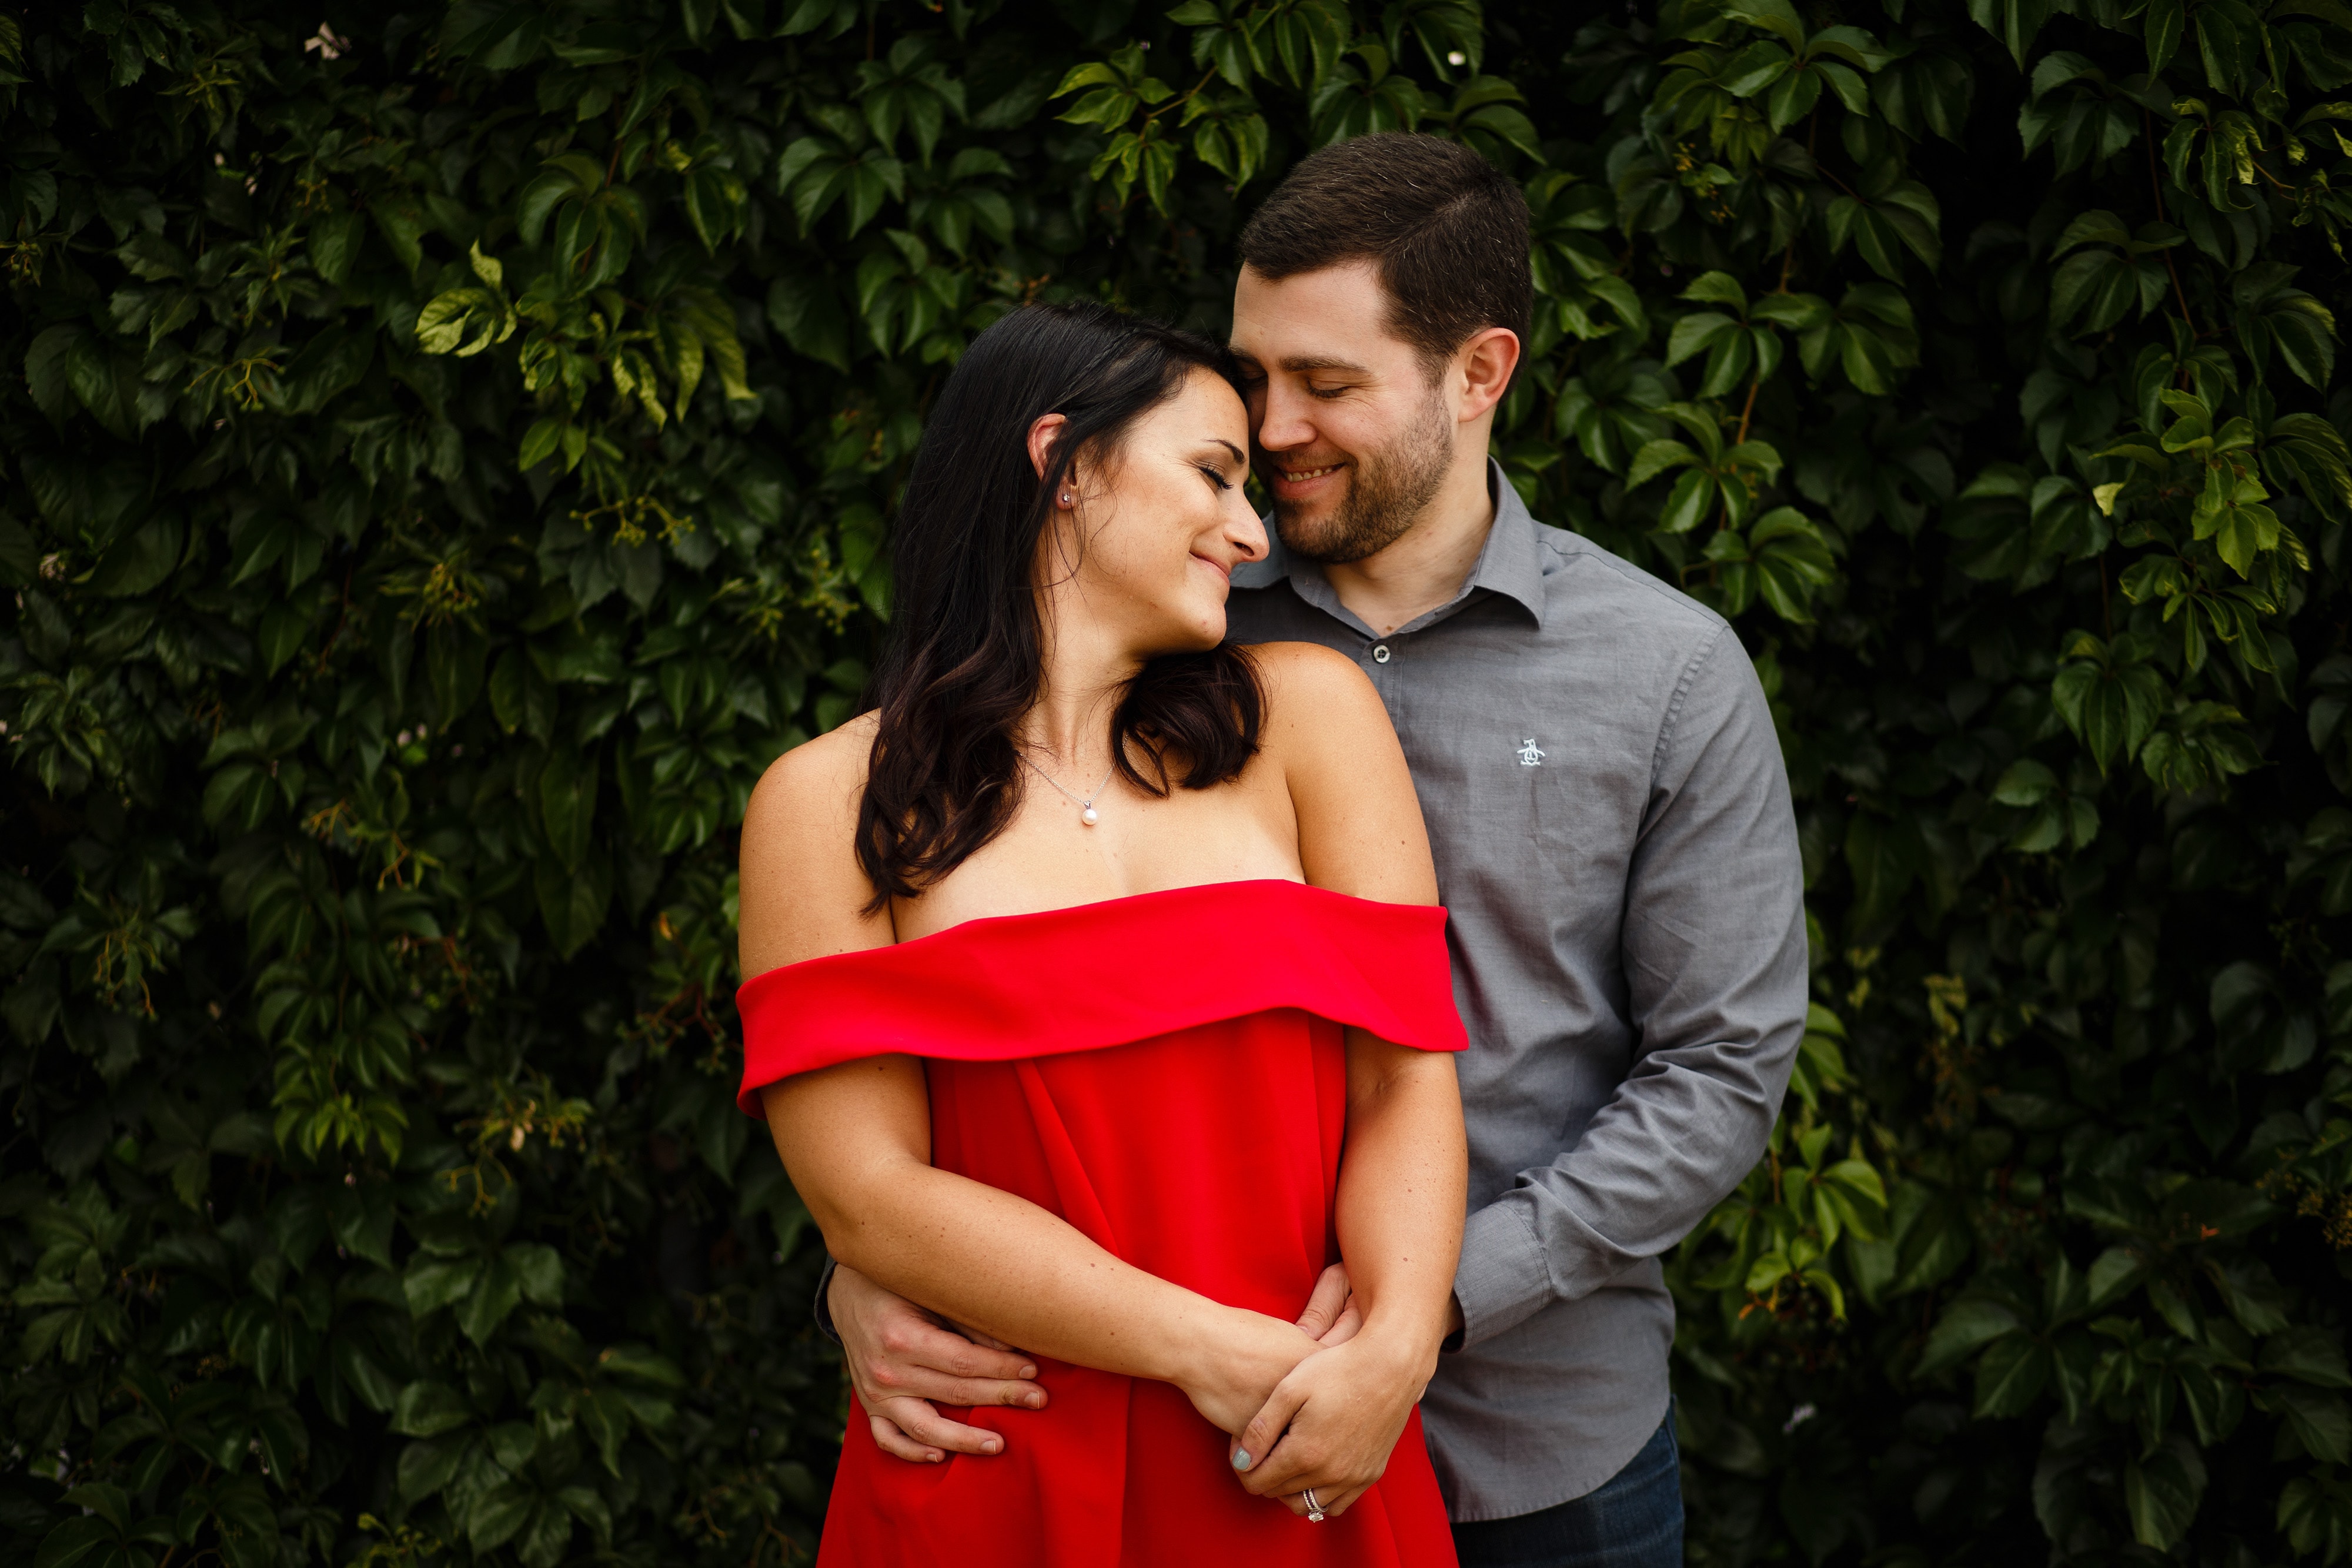 Danielle wears a red strapless blouse during her engagement session with Jordan in Denver